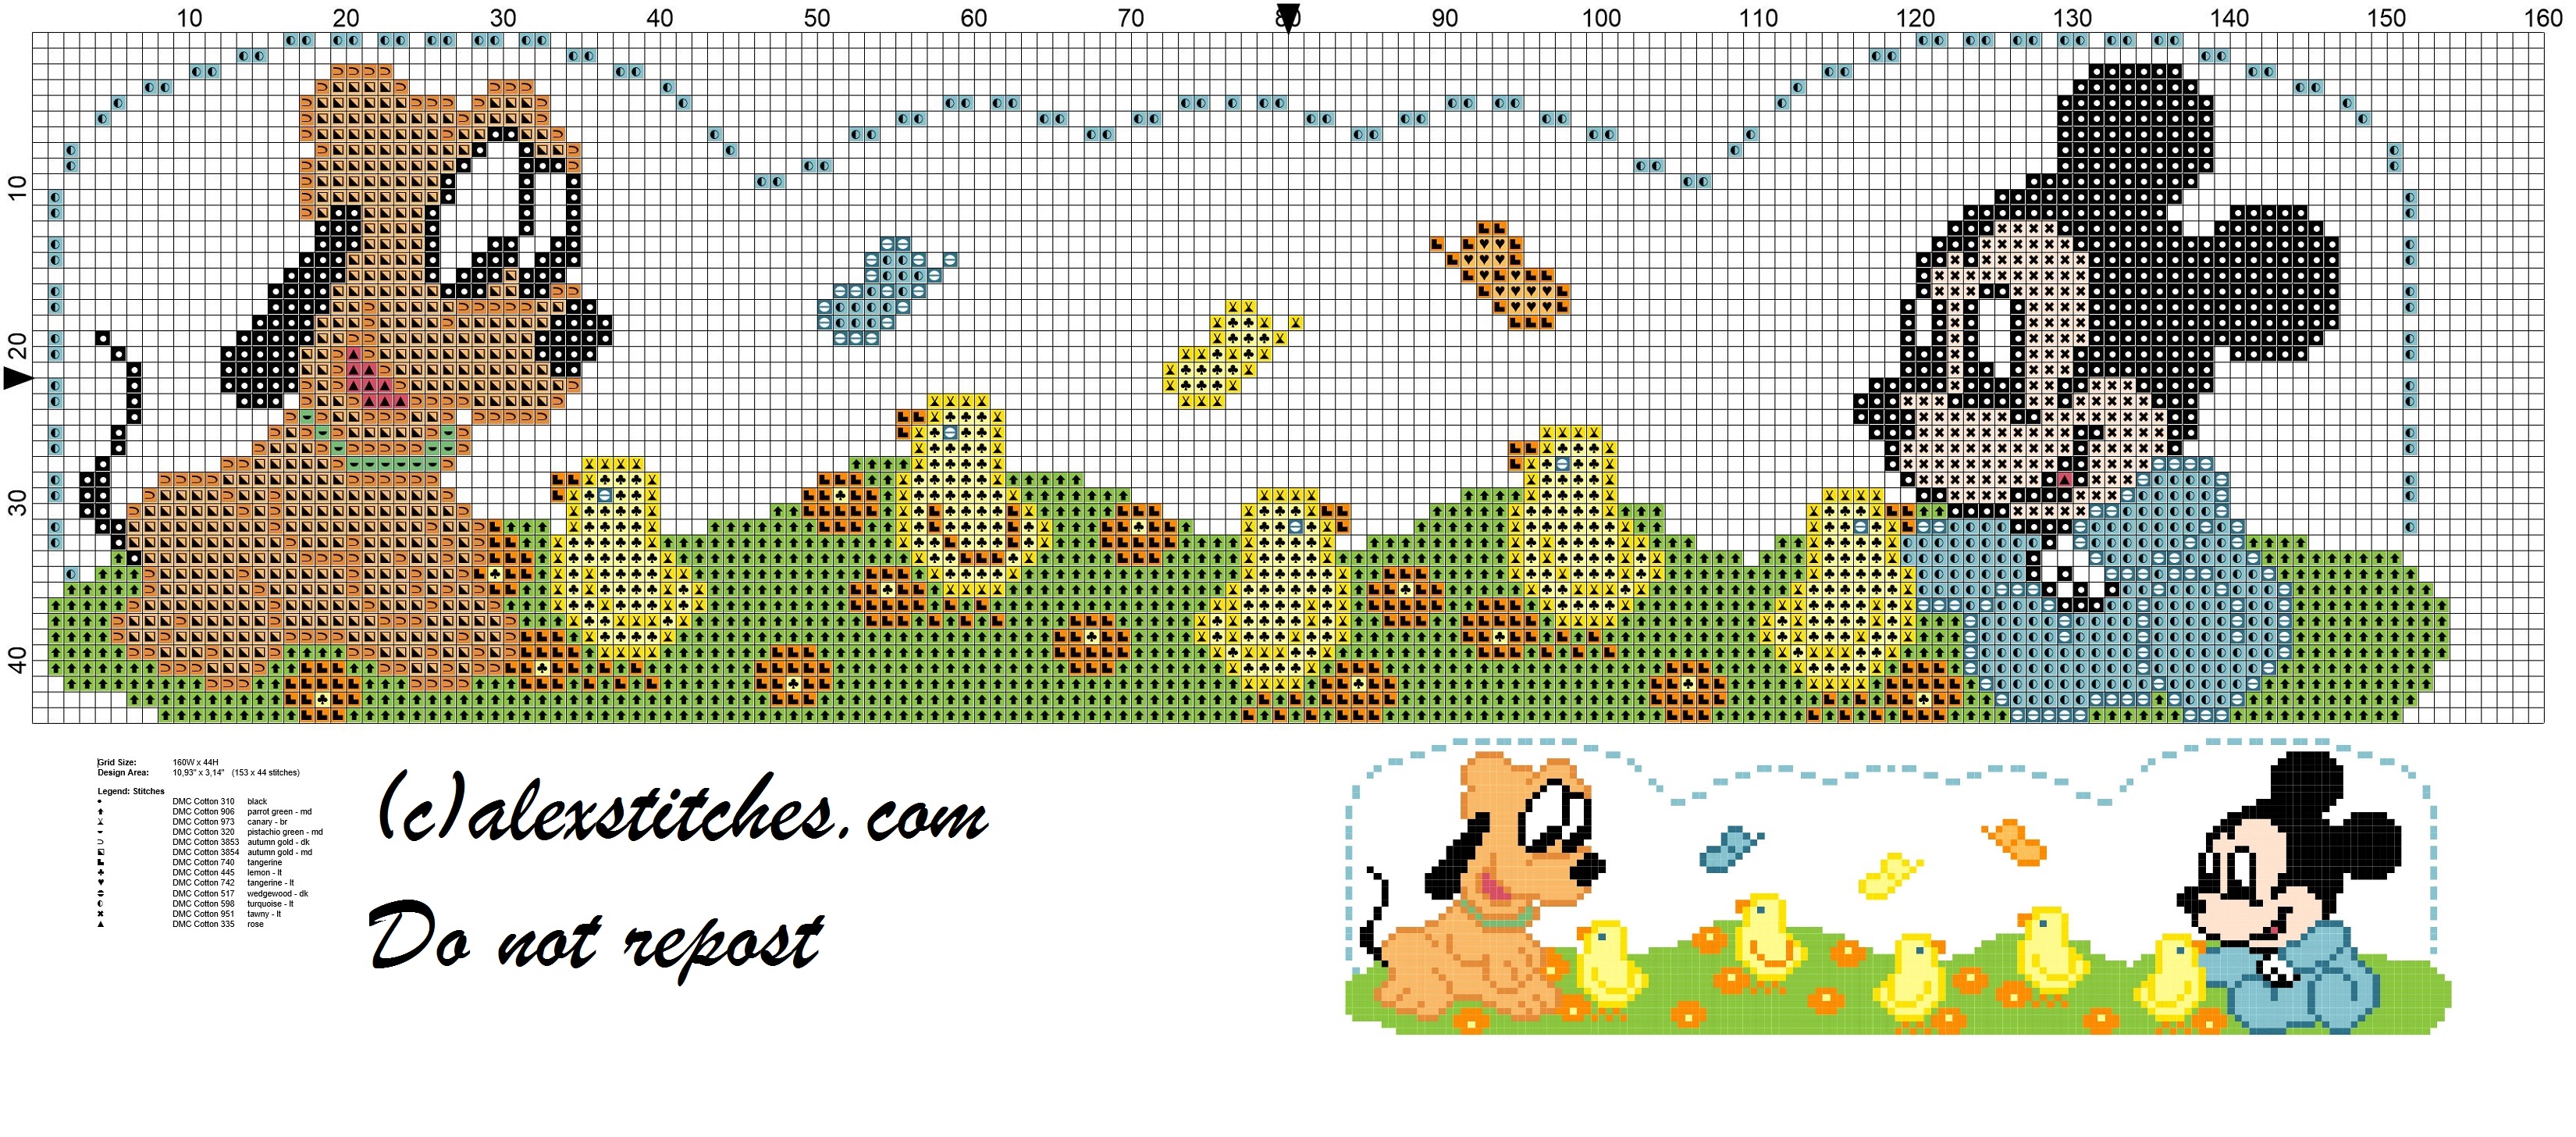 Sheet with baby Mickey Mouse, Pluto and zebra cross stitch pattern